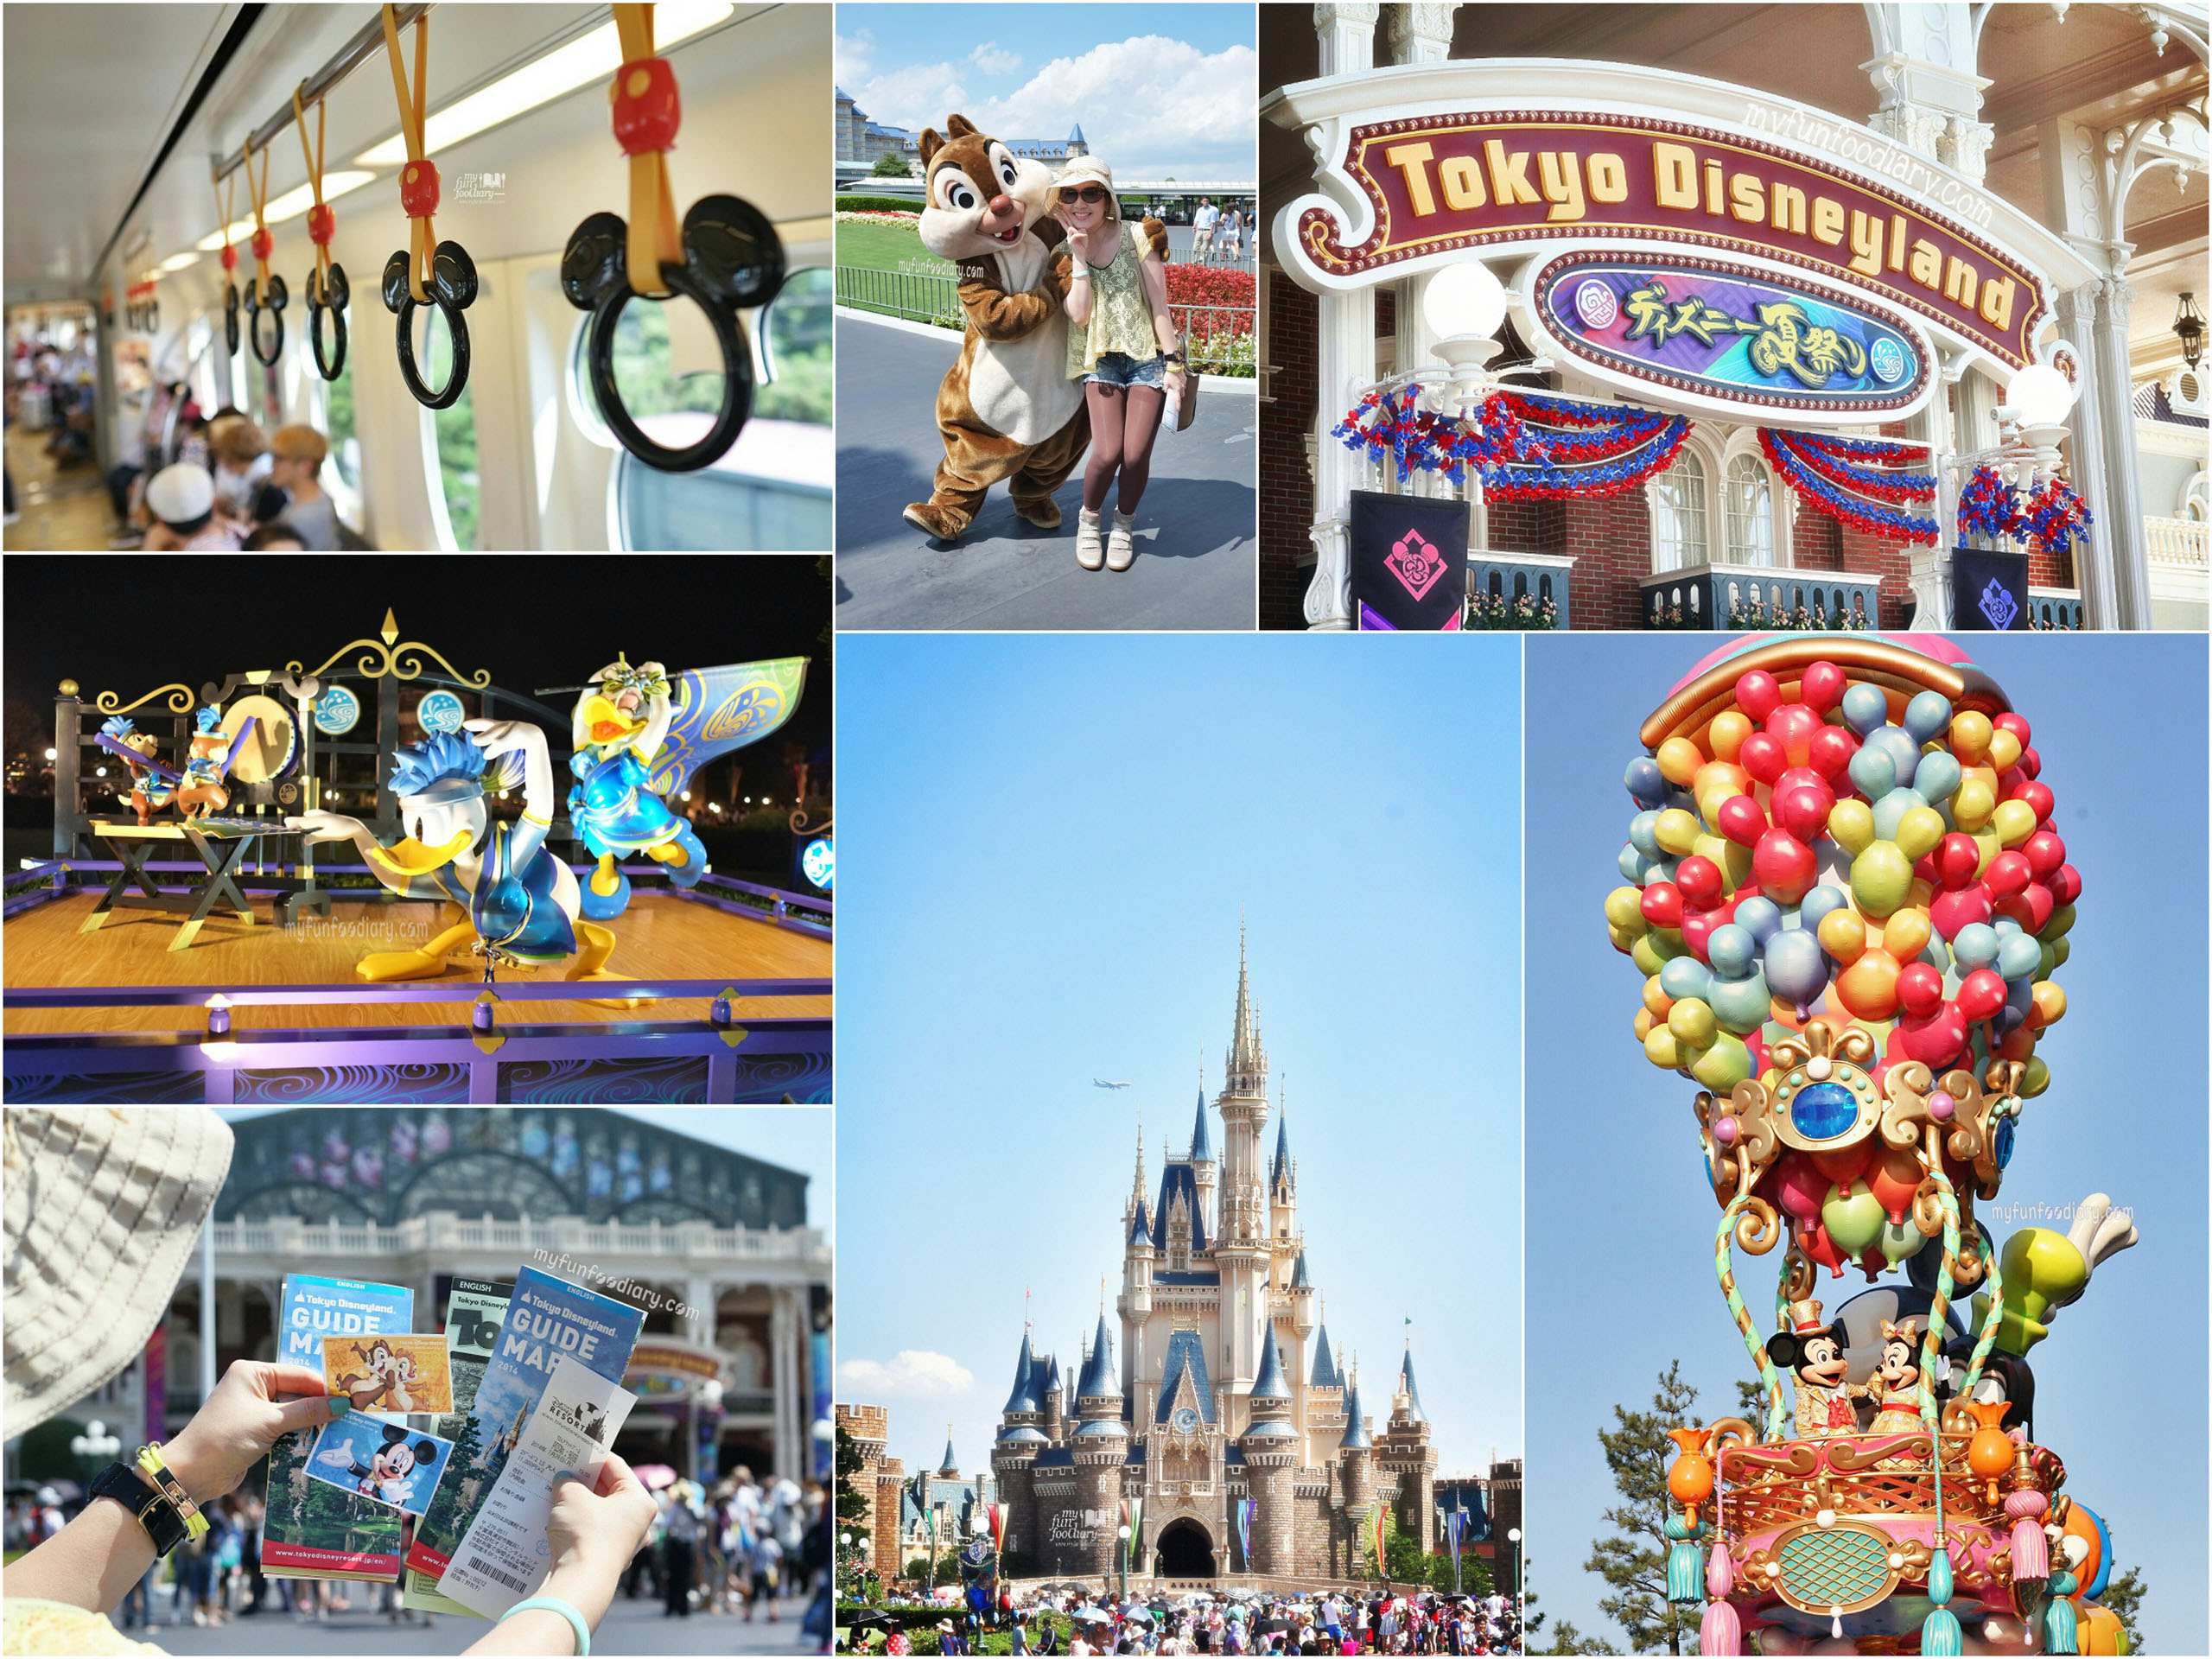 Paradise of all ages - Tokyo Disneyland by Myfunfoodiary